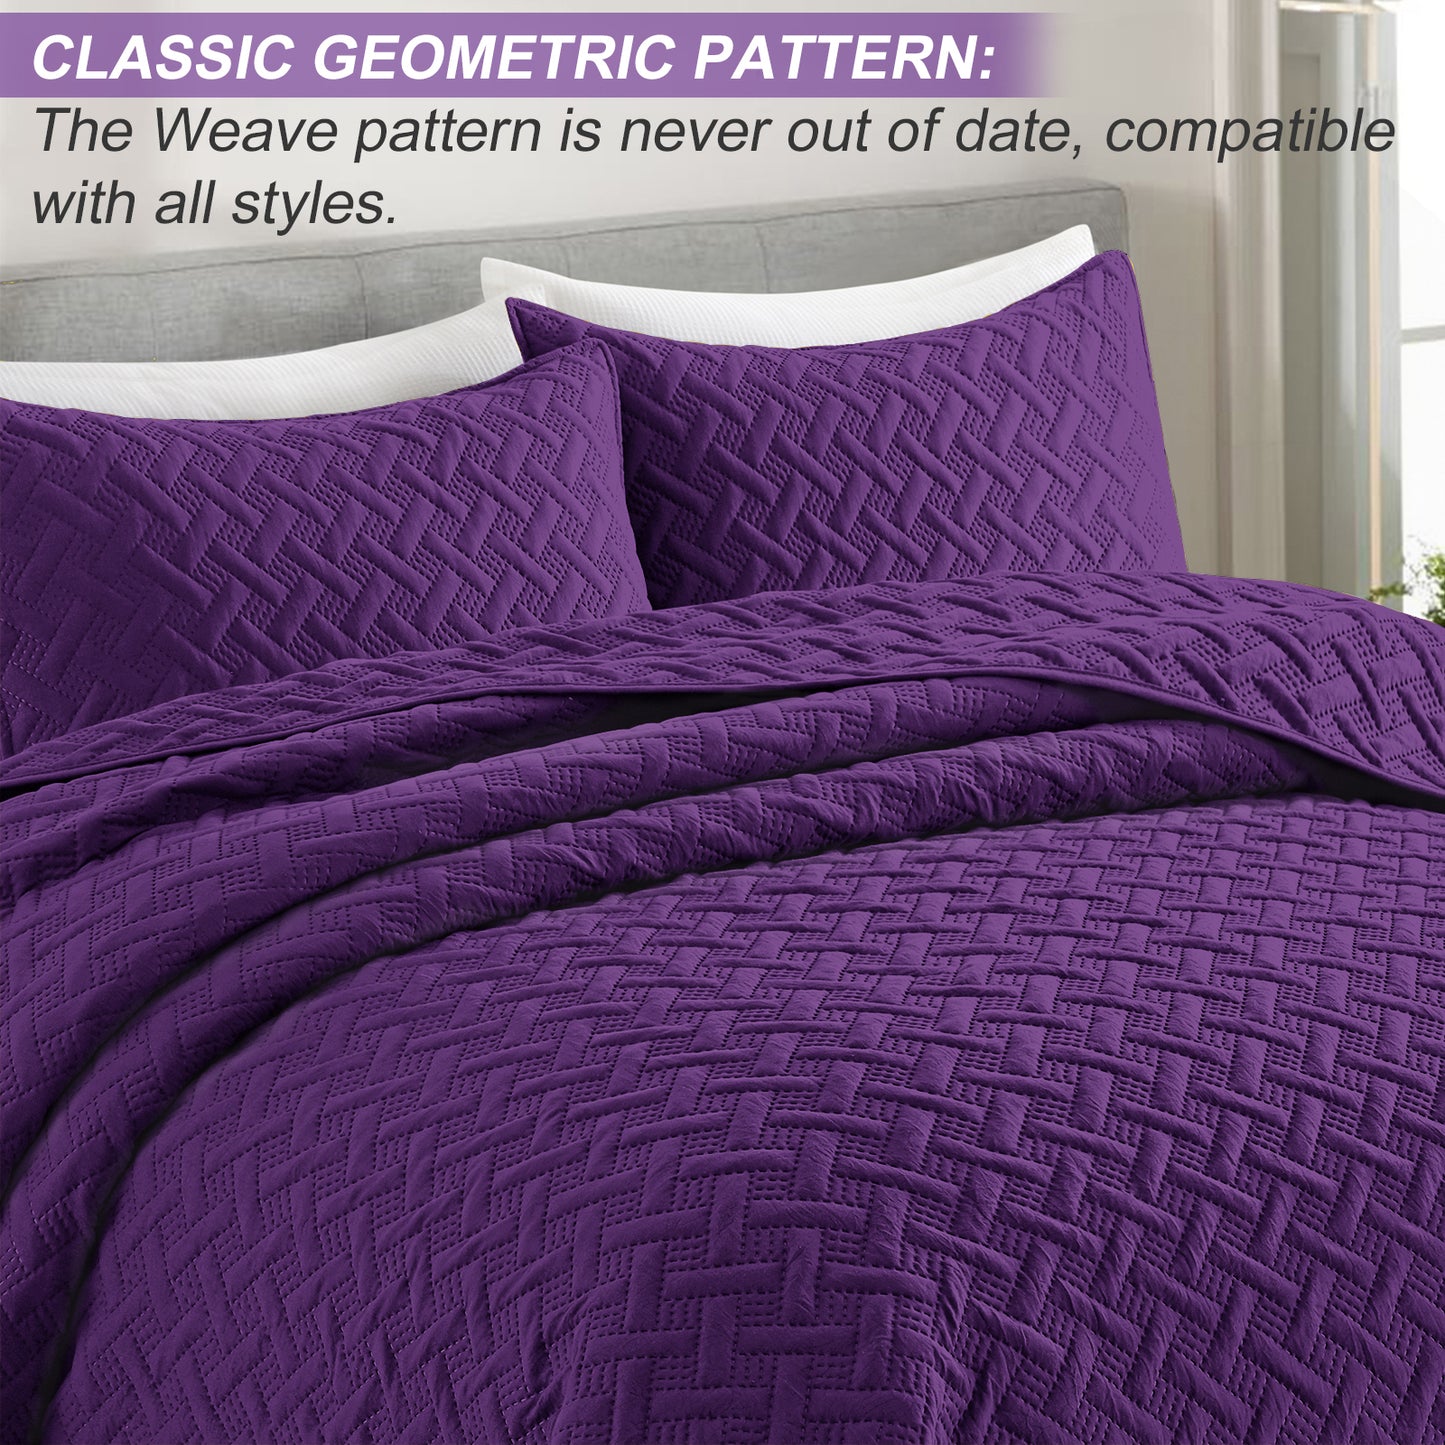 Exclusivo Mezcla 2-Piece Deep Purple Twin Size Quilt Set, Weave Pattern Ultrasonic Lightweight and Soft Quilts/Bedspreads/Coverlets/Bedding Set (1 Quilt, 1 Pillow Sham) for All Seasons